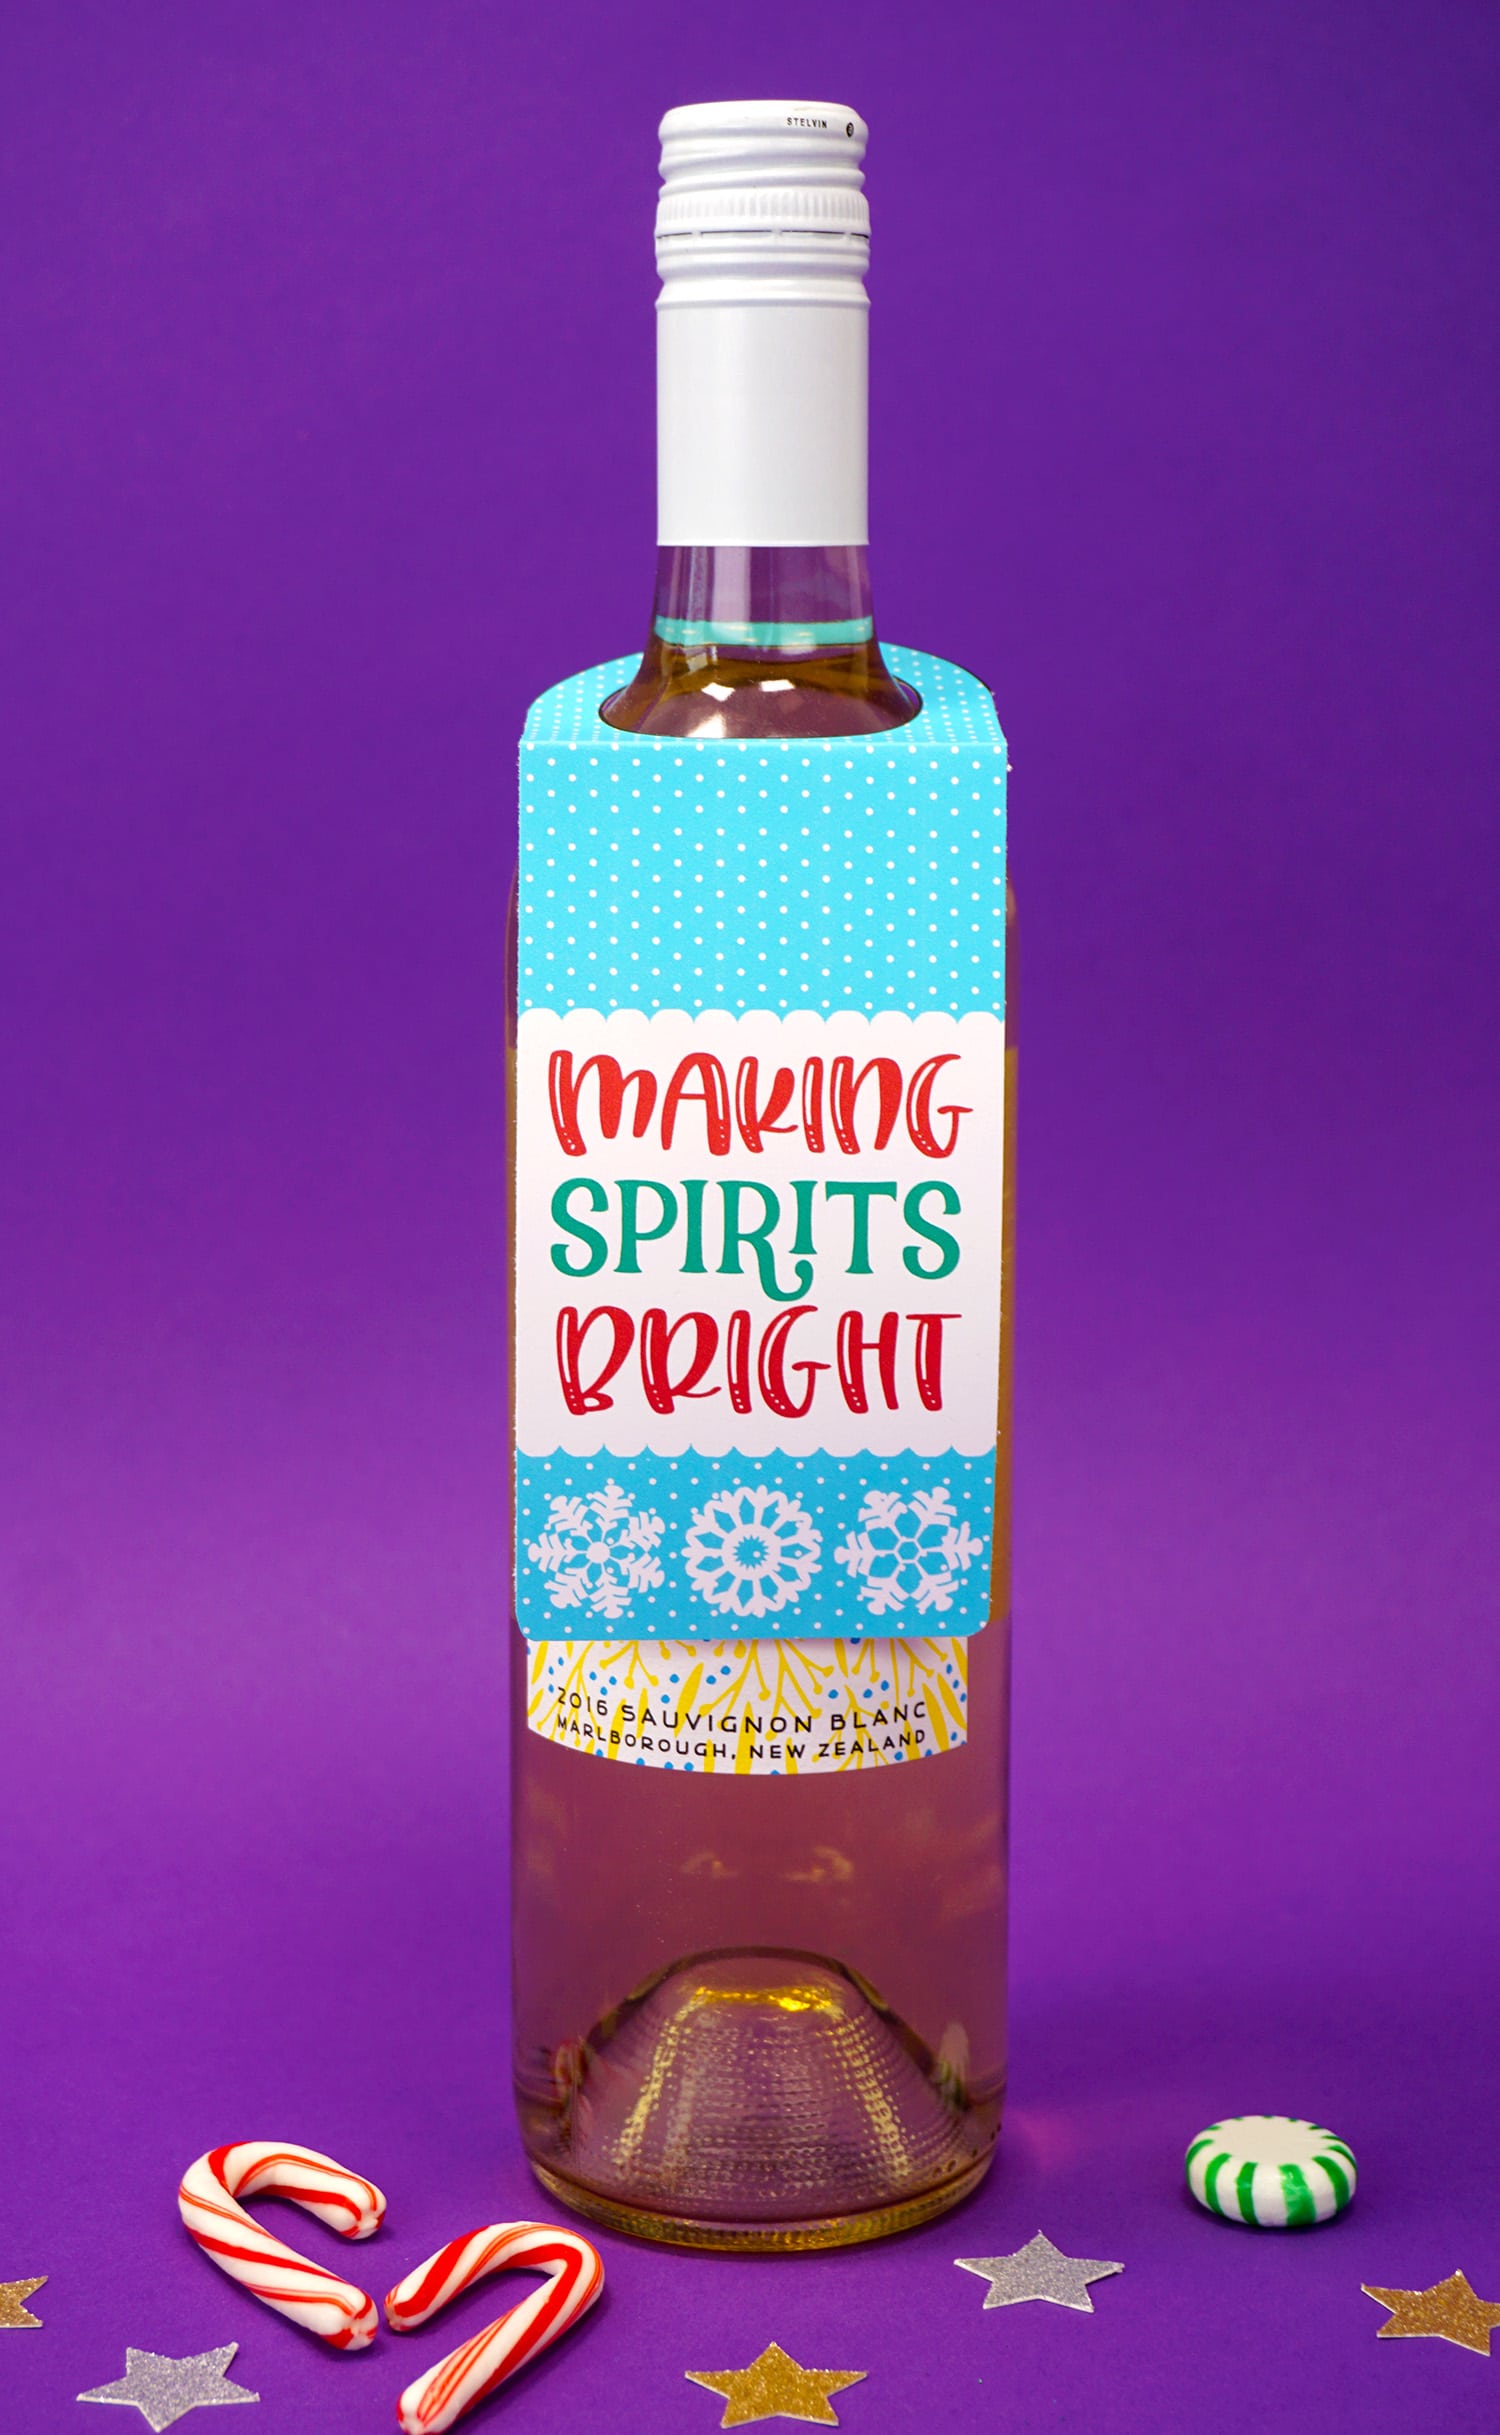 "Making Spirits Bright" Christmas wine tag on bottle on purple background with candy canes and stars